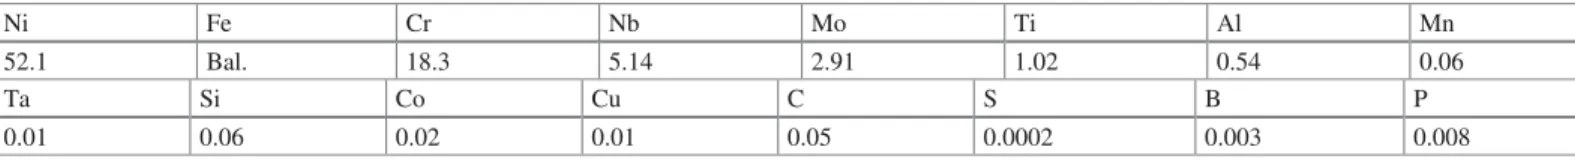 Table 1 Chemical composition in wt% of the superalloy 718 heat used in this study